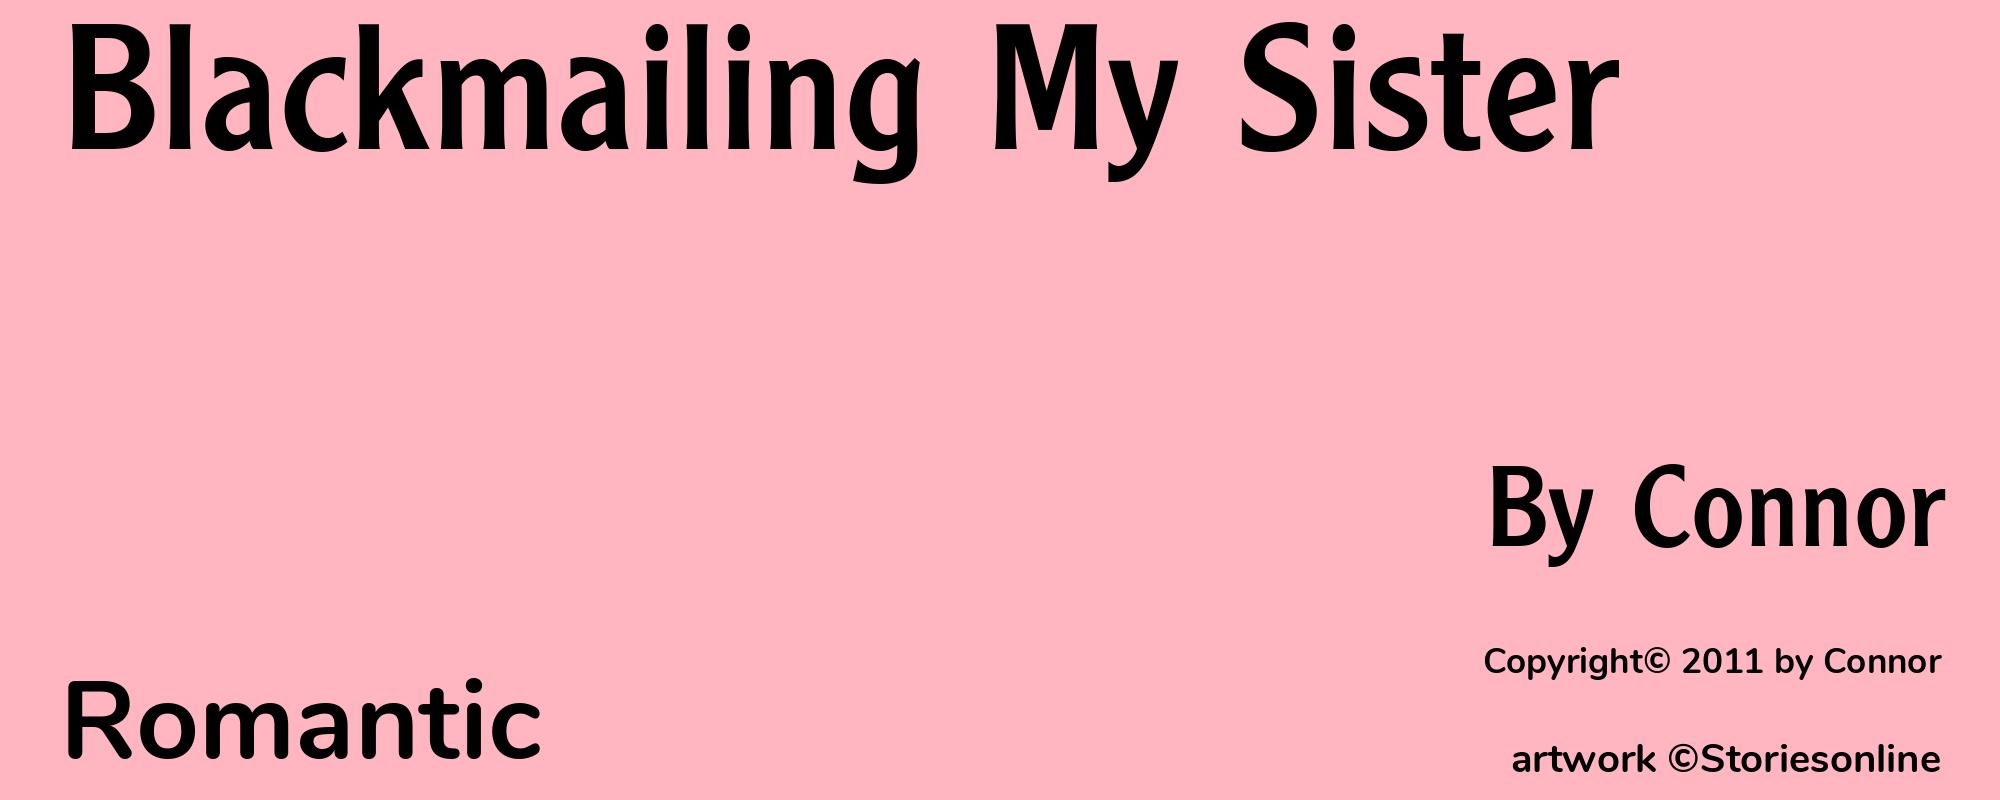 Blackmailing My Sister - Cover